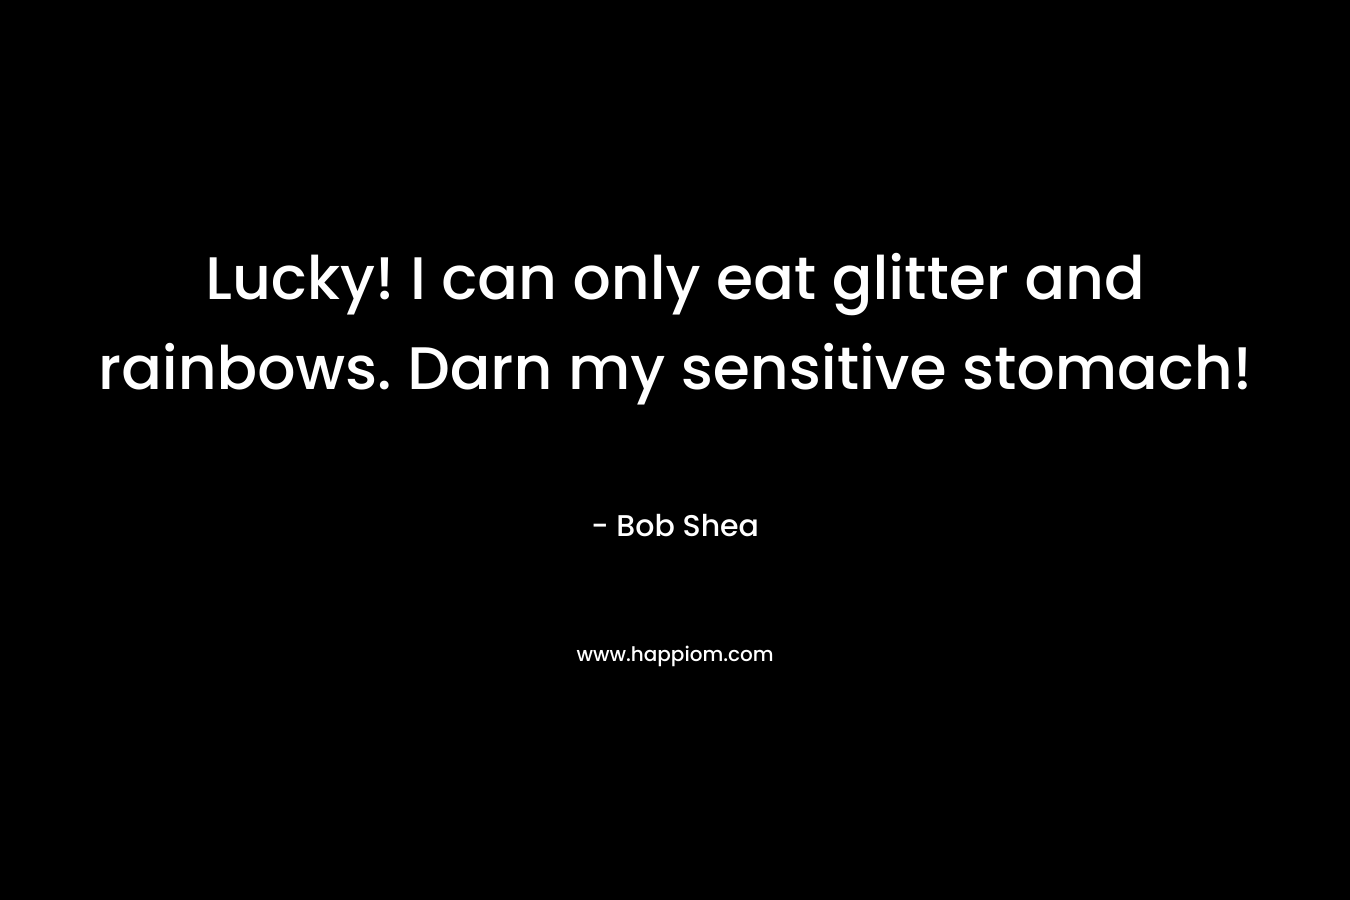 Lucky! I can only eat glitter and rainbows. Darn my sensitive stomach! – Bob Shea